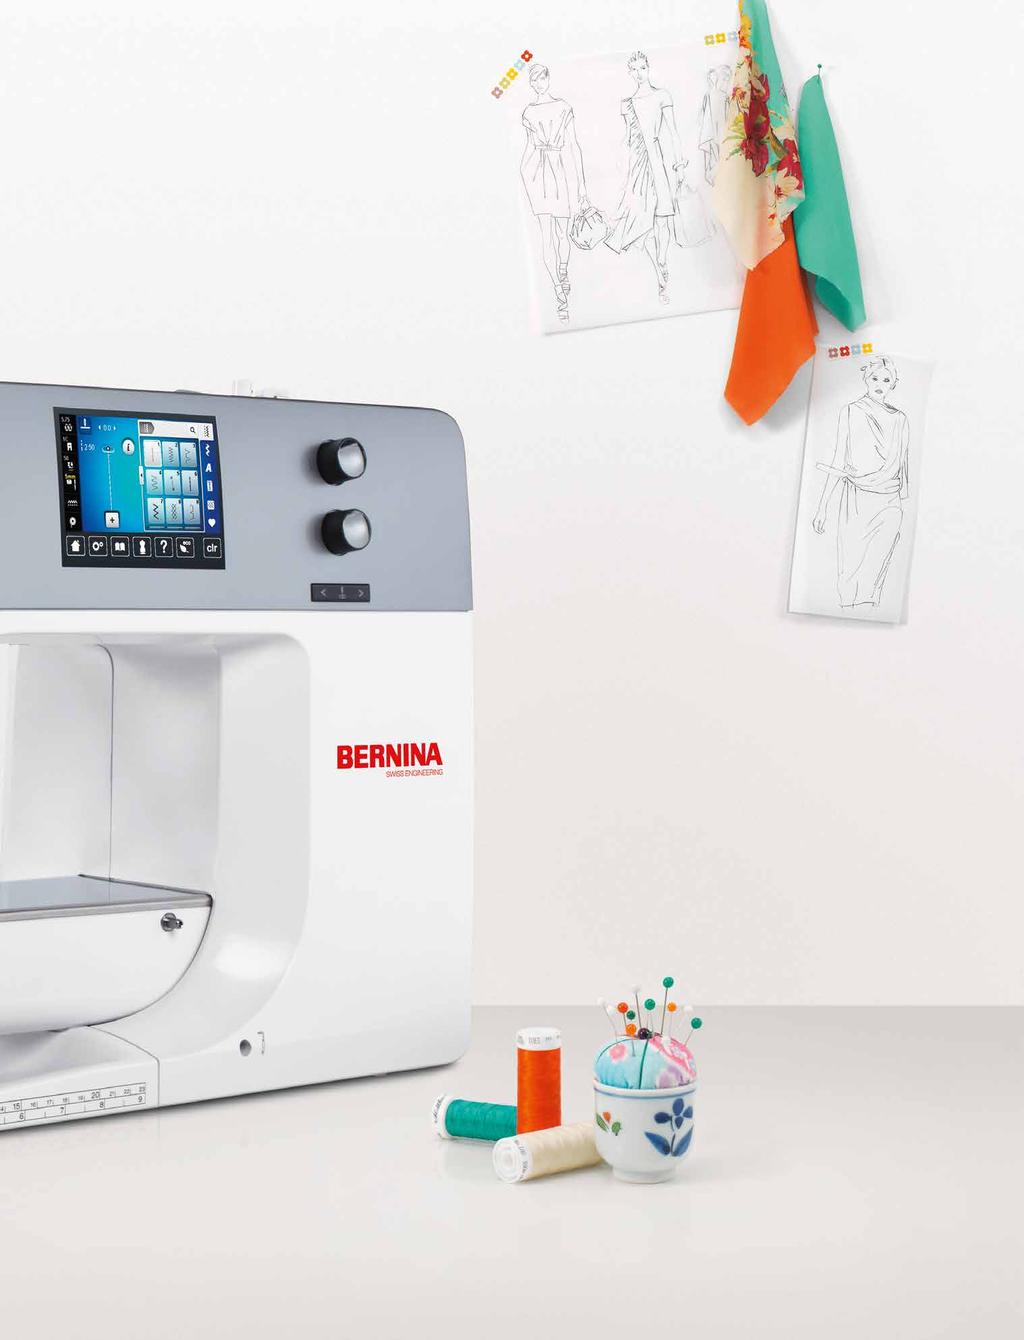 Easy navigation on a centrally located color touch screen BERNINA